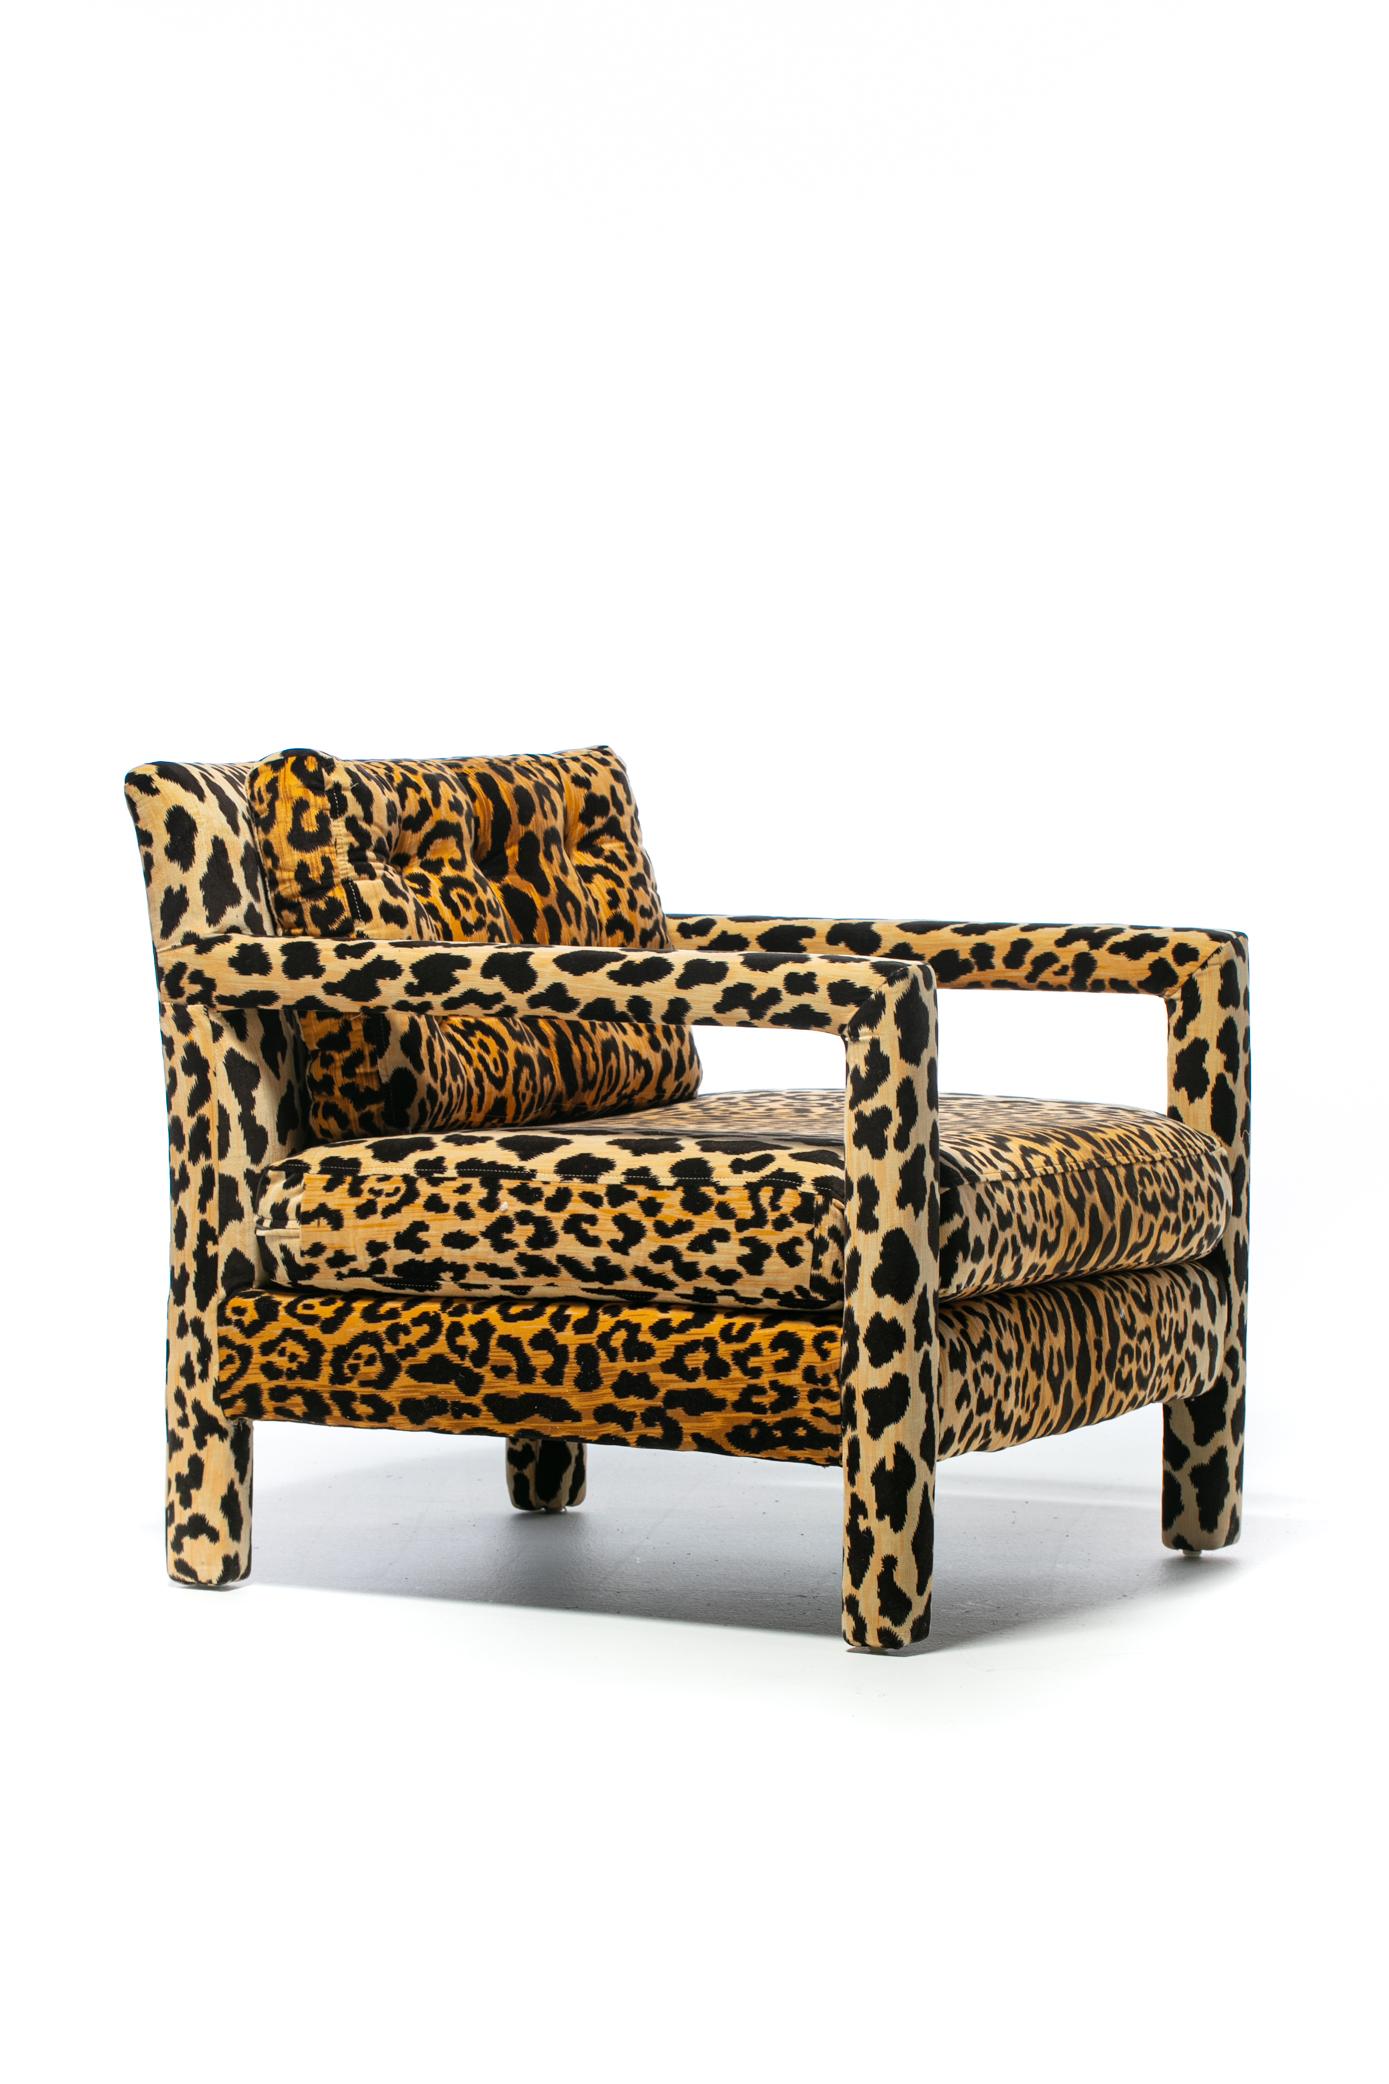 Pair of Milo Baughman Style Mid Century Parsons Chairs in Leopard Velvet c. 1970 For Sale 2